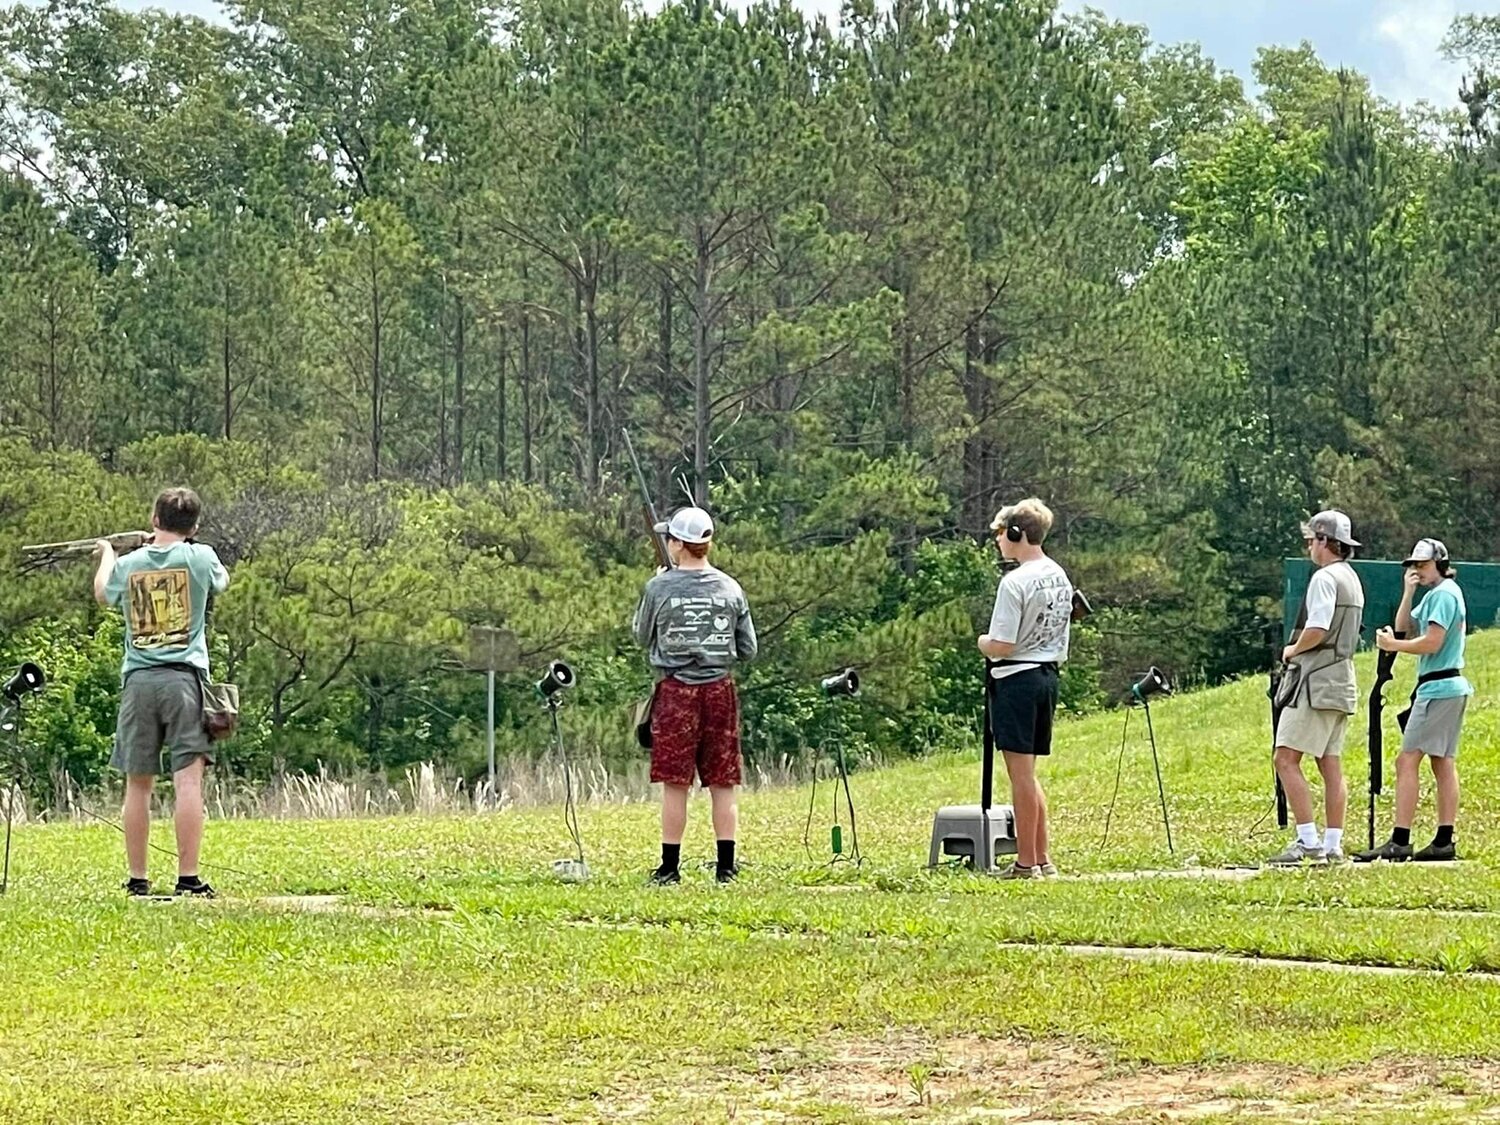 Emmanuel Christian School and the Dixie Trap & Gun Club in Matthew hosted the Trap Shoot Finals where the Baldwin County High School Sporting Clays team recently competed.